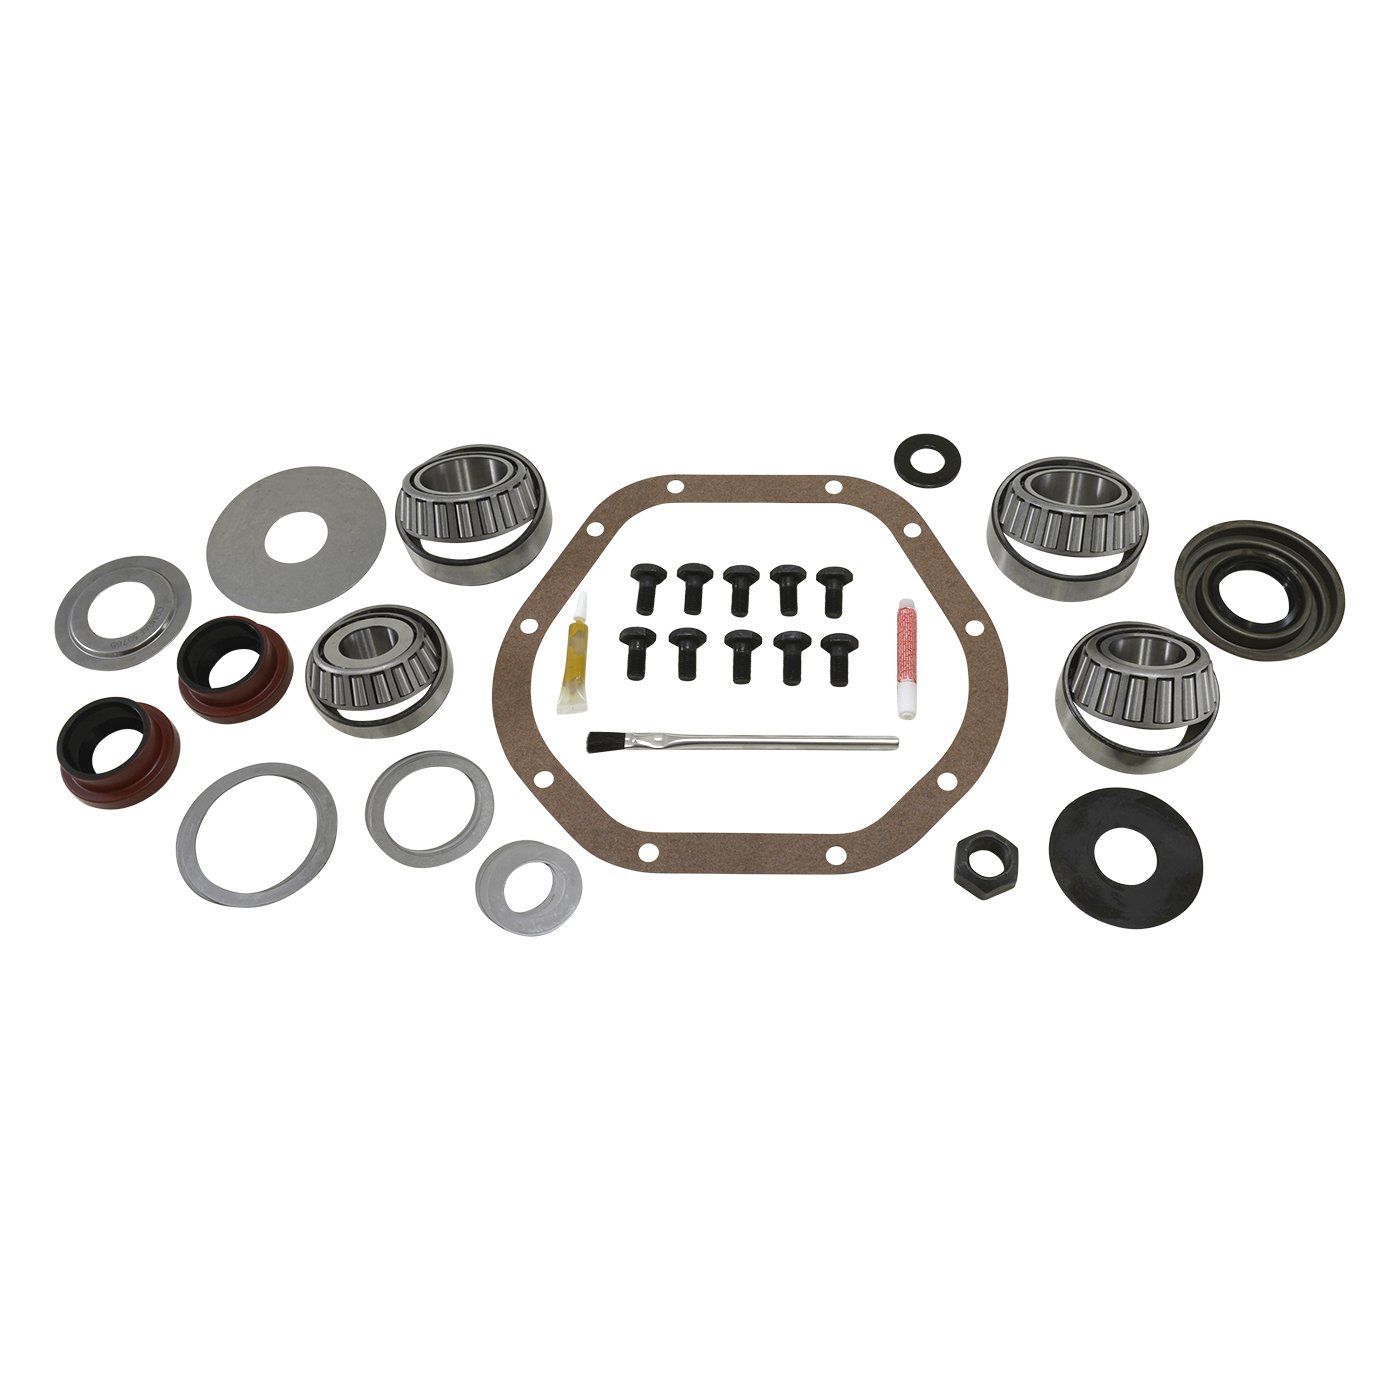 USA Standard ZK D44 Master Overhaul Kit, For The Dana 44 Differential With 30 Spline